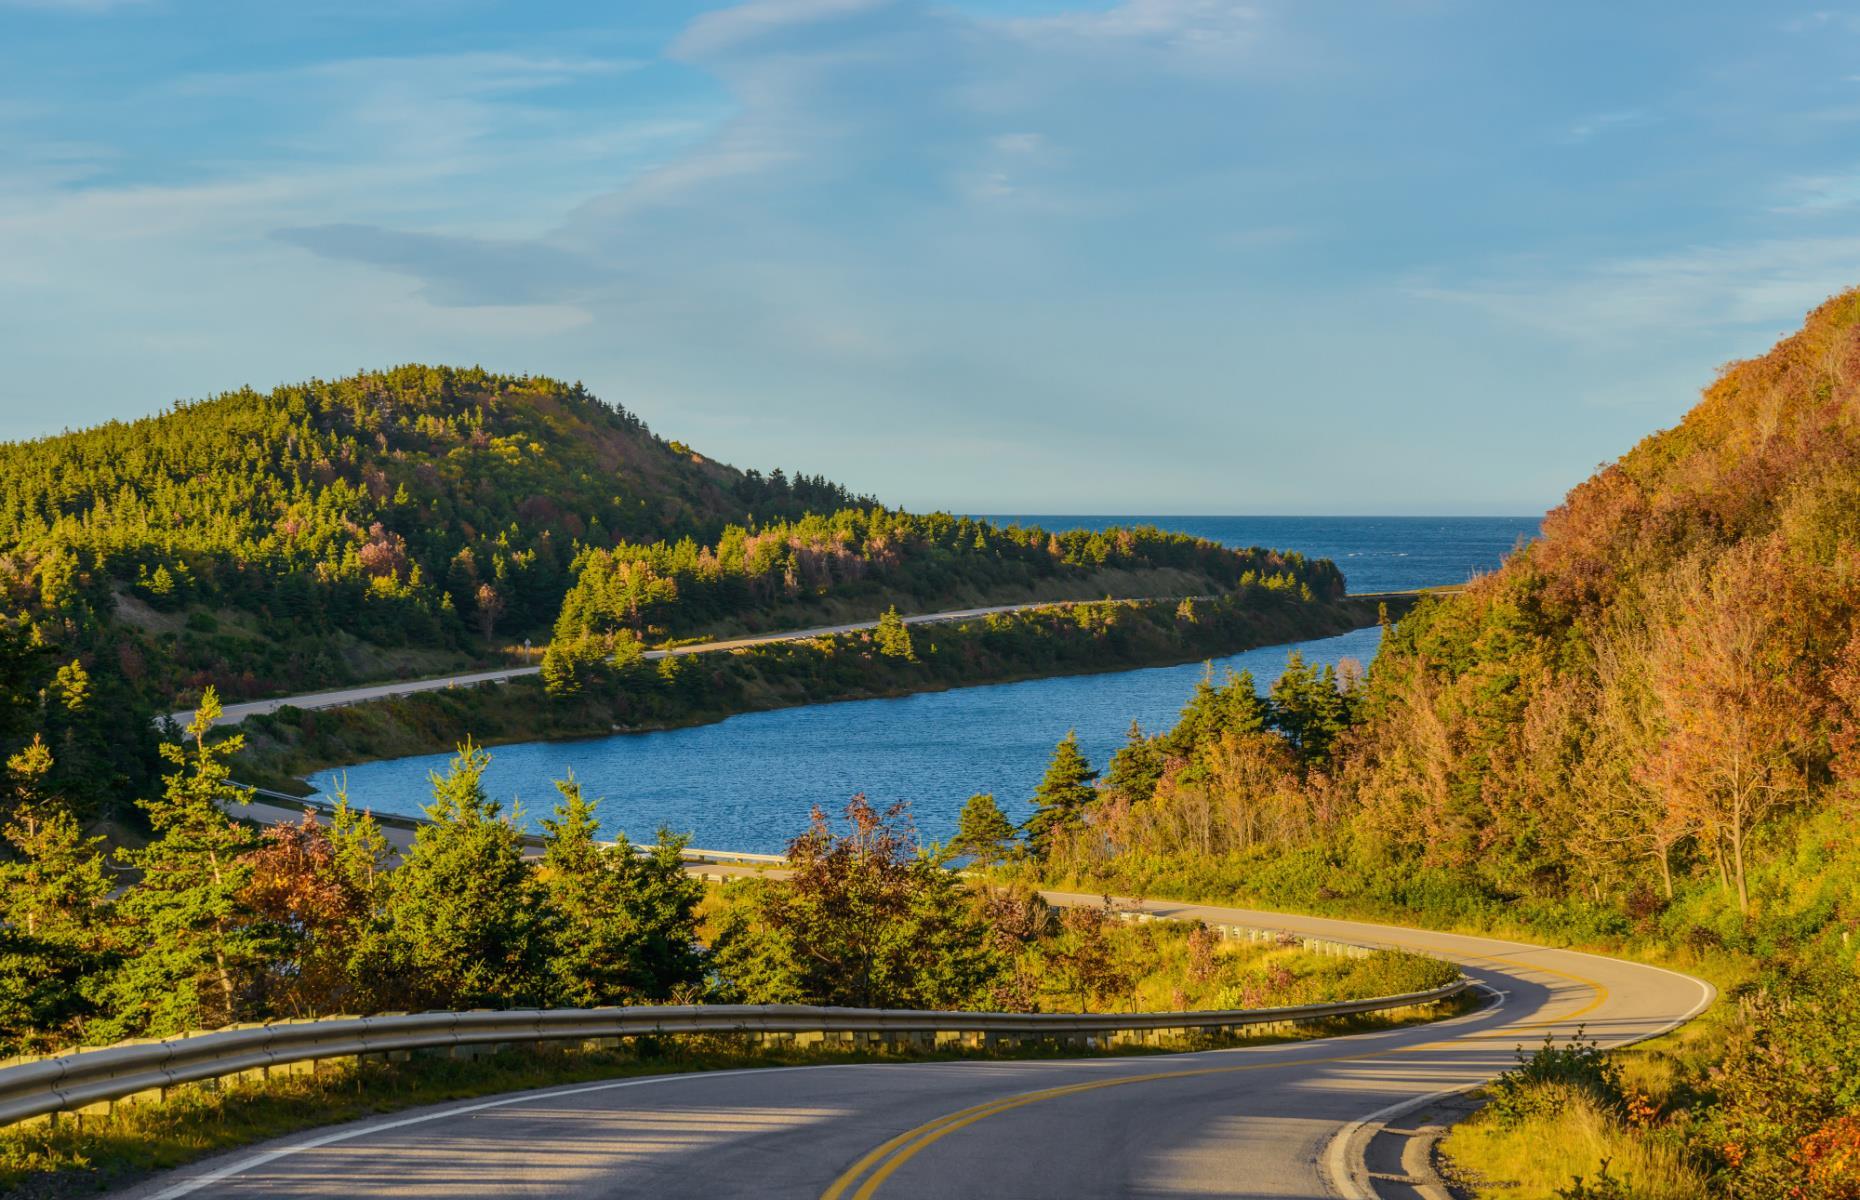 When it comes to road-tripping, there’s a lot of ground to cover in Canada. It’s best to discover the world’s second-largest country bit by bit, with short road trips that reveal what makes each of the country’s provinces and territories unique. All 25 of these Canadian adventures can easily be taken over the course of a weekend.